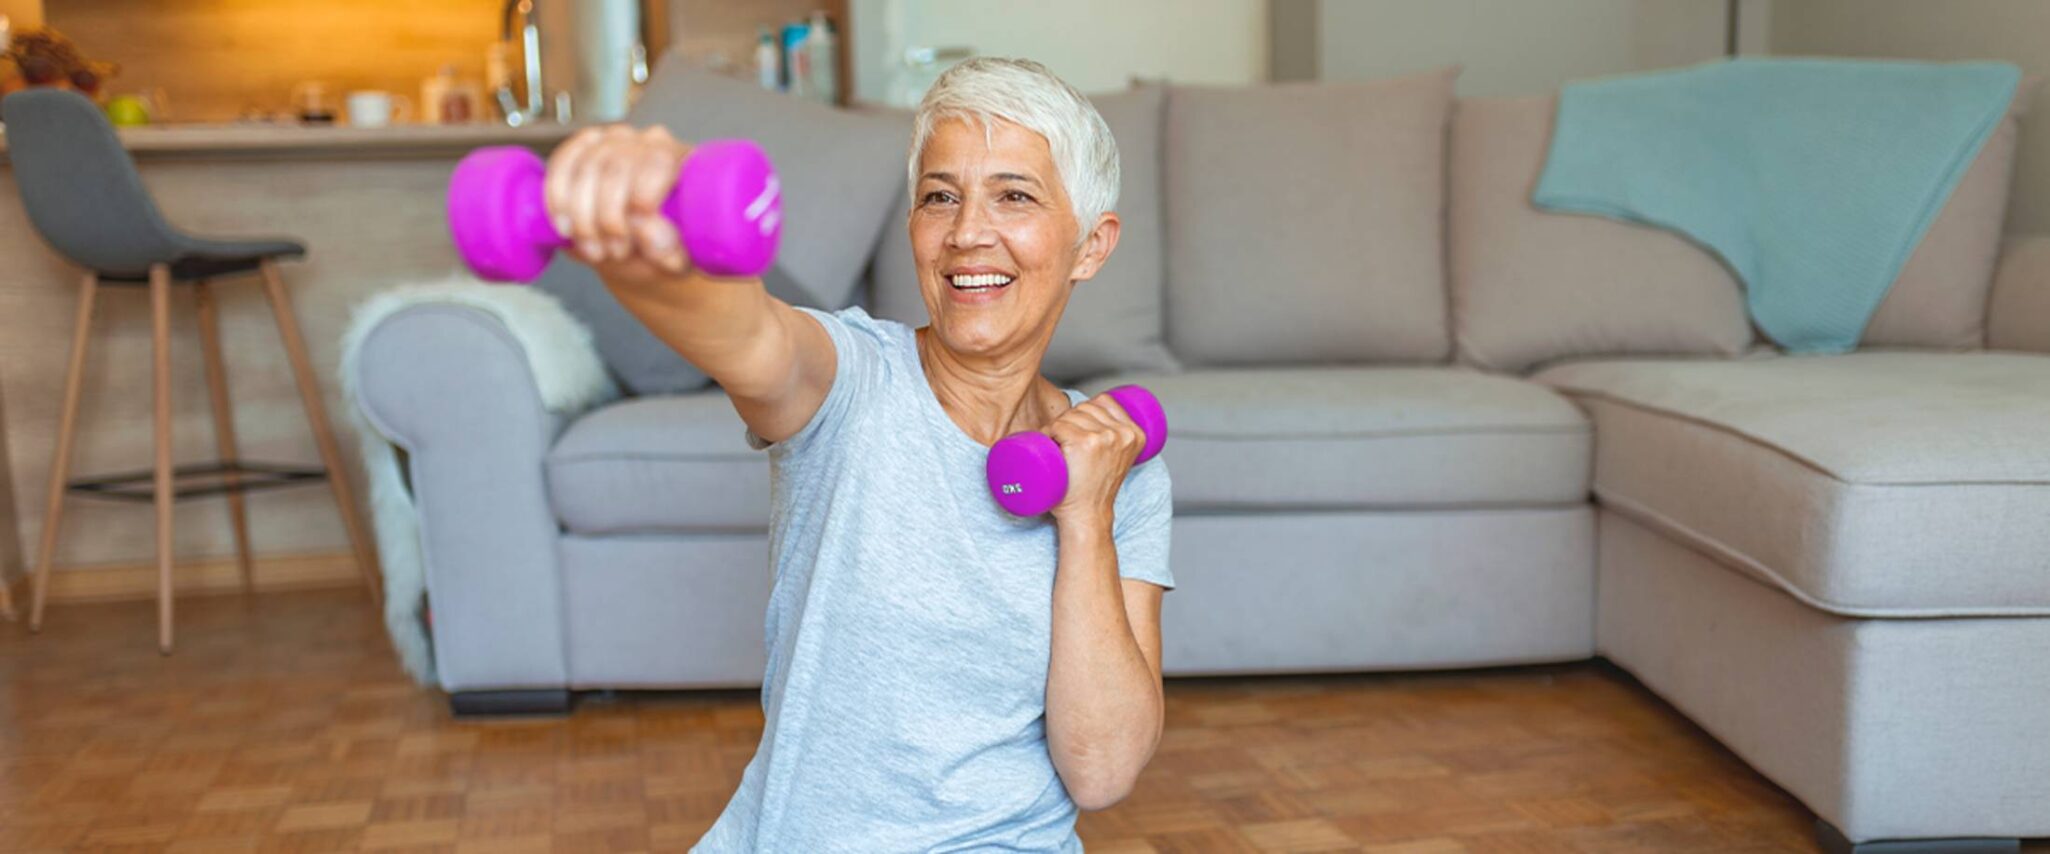 A senior woman works out with pink free weights